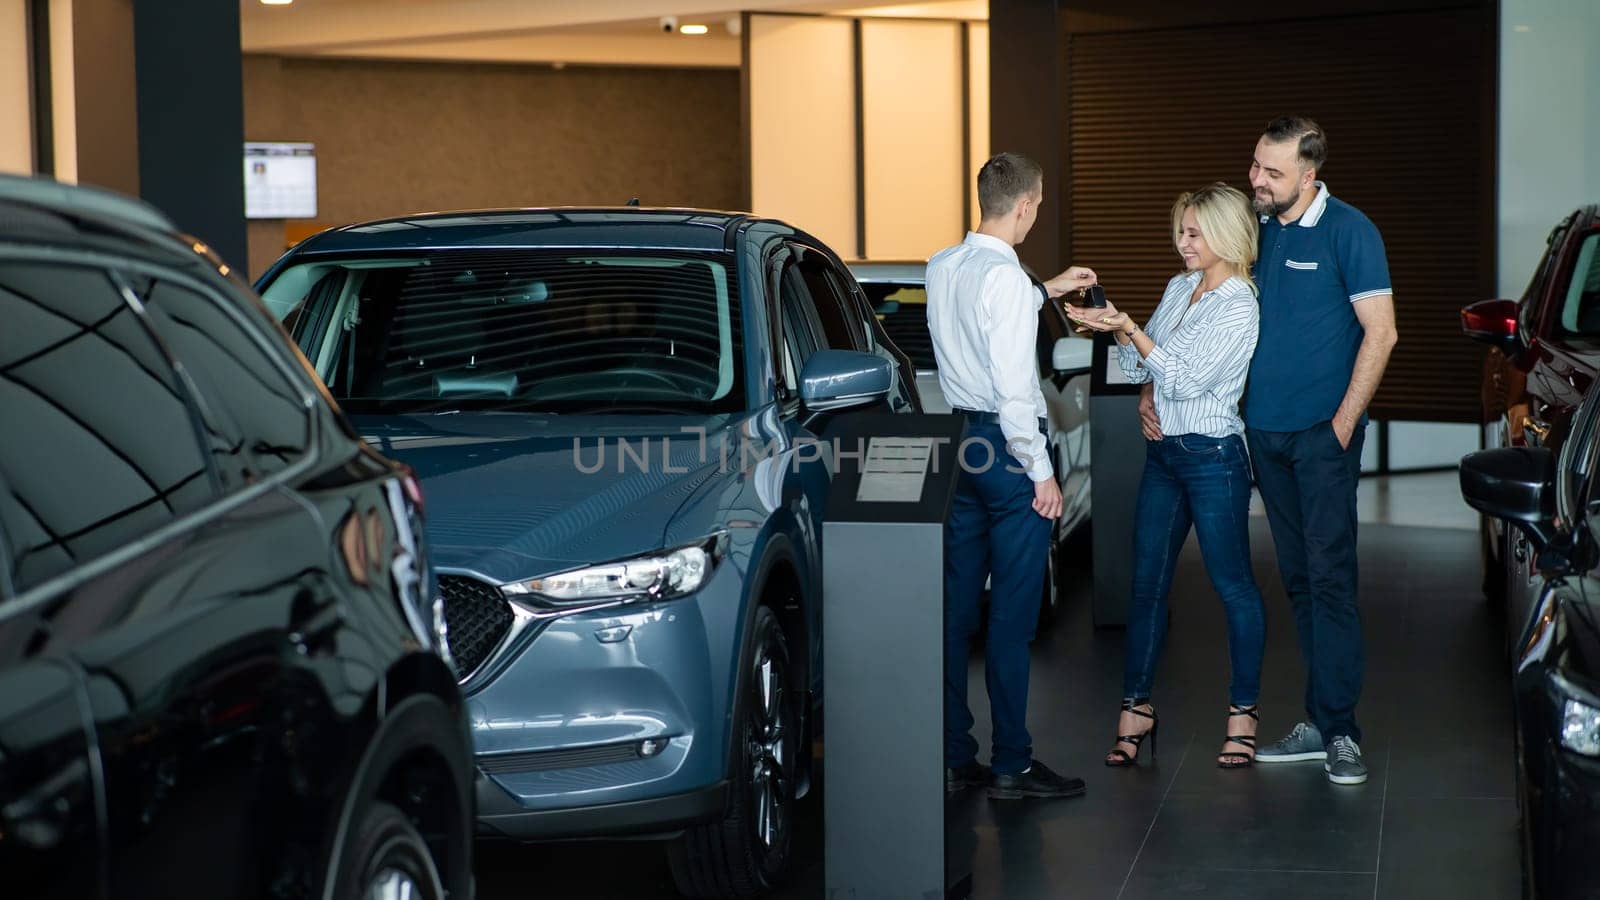 The seller hands over the car keys to the buyers. The couple bought a new car. by mrwed54